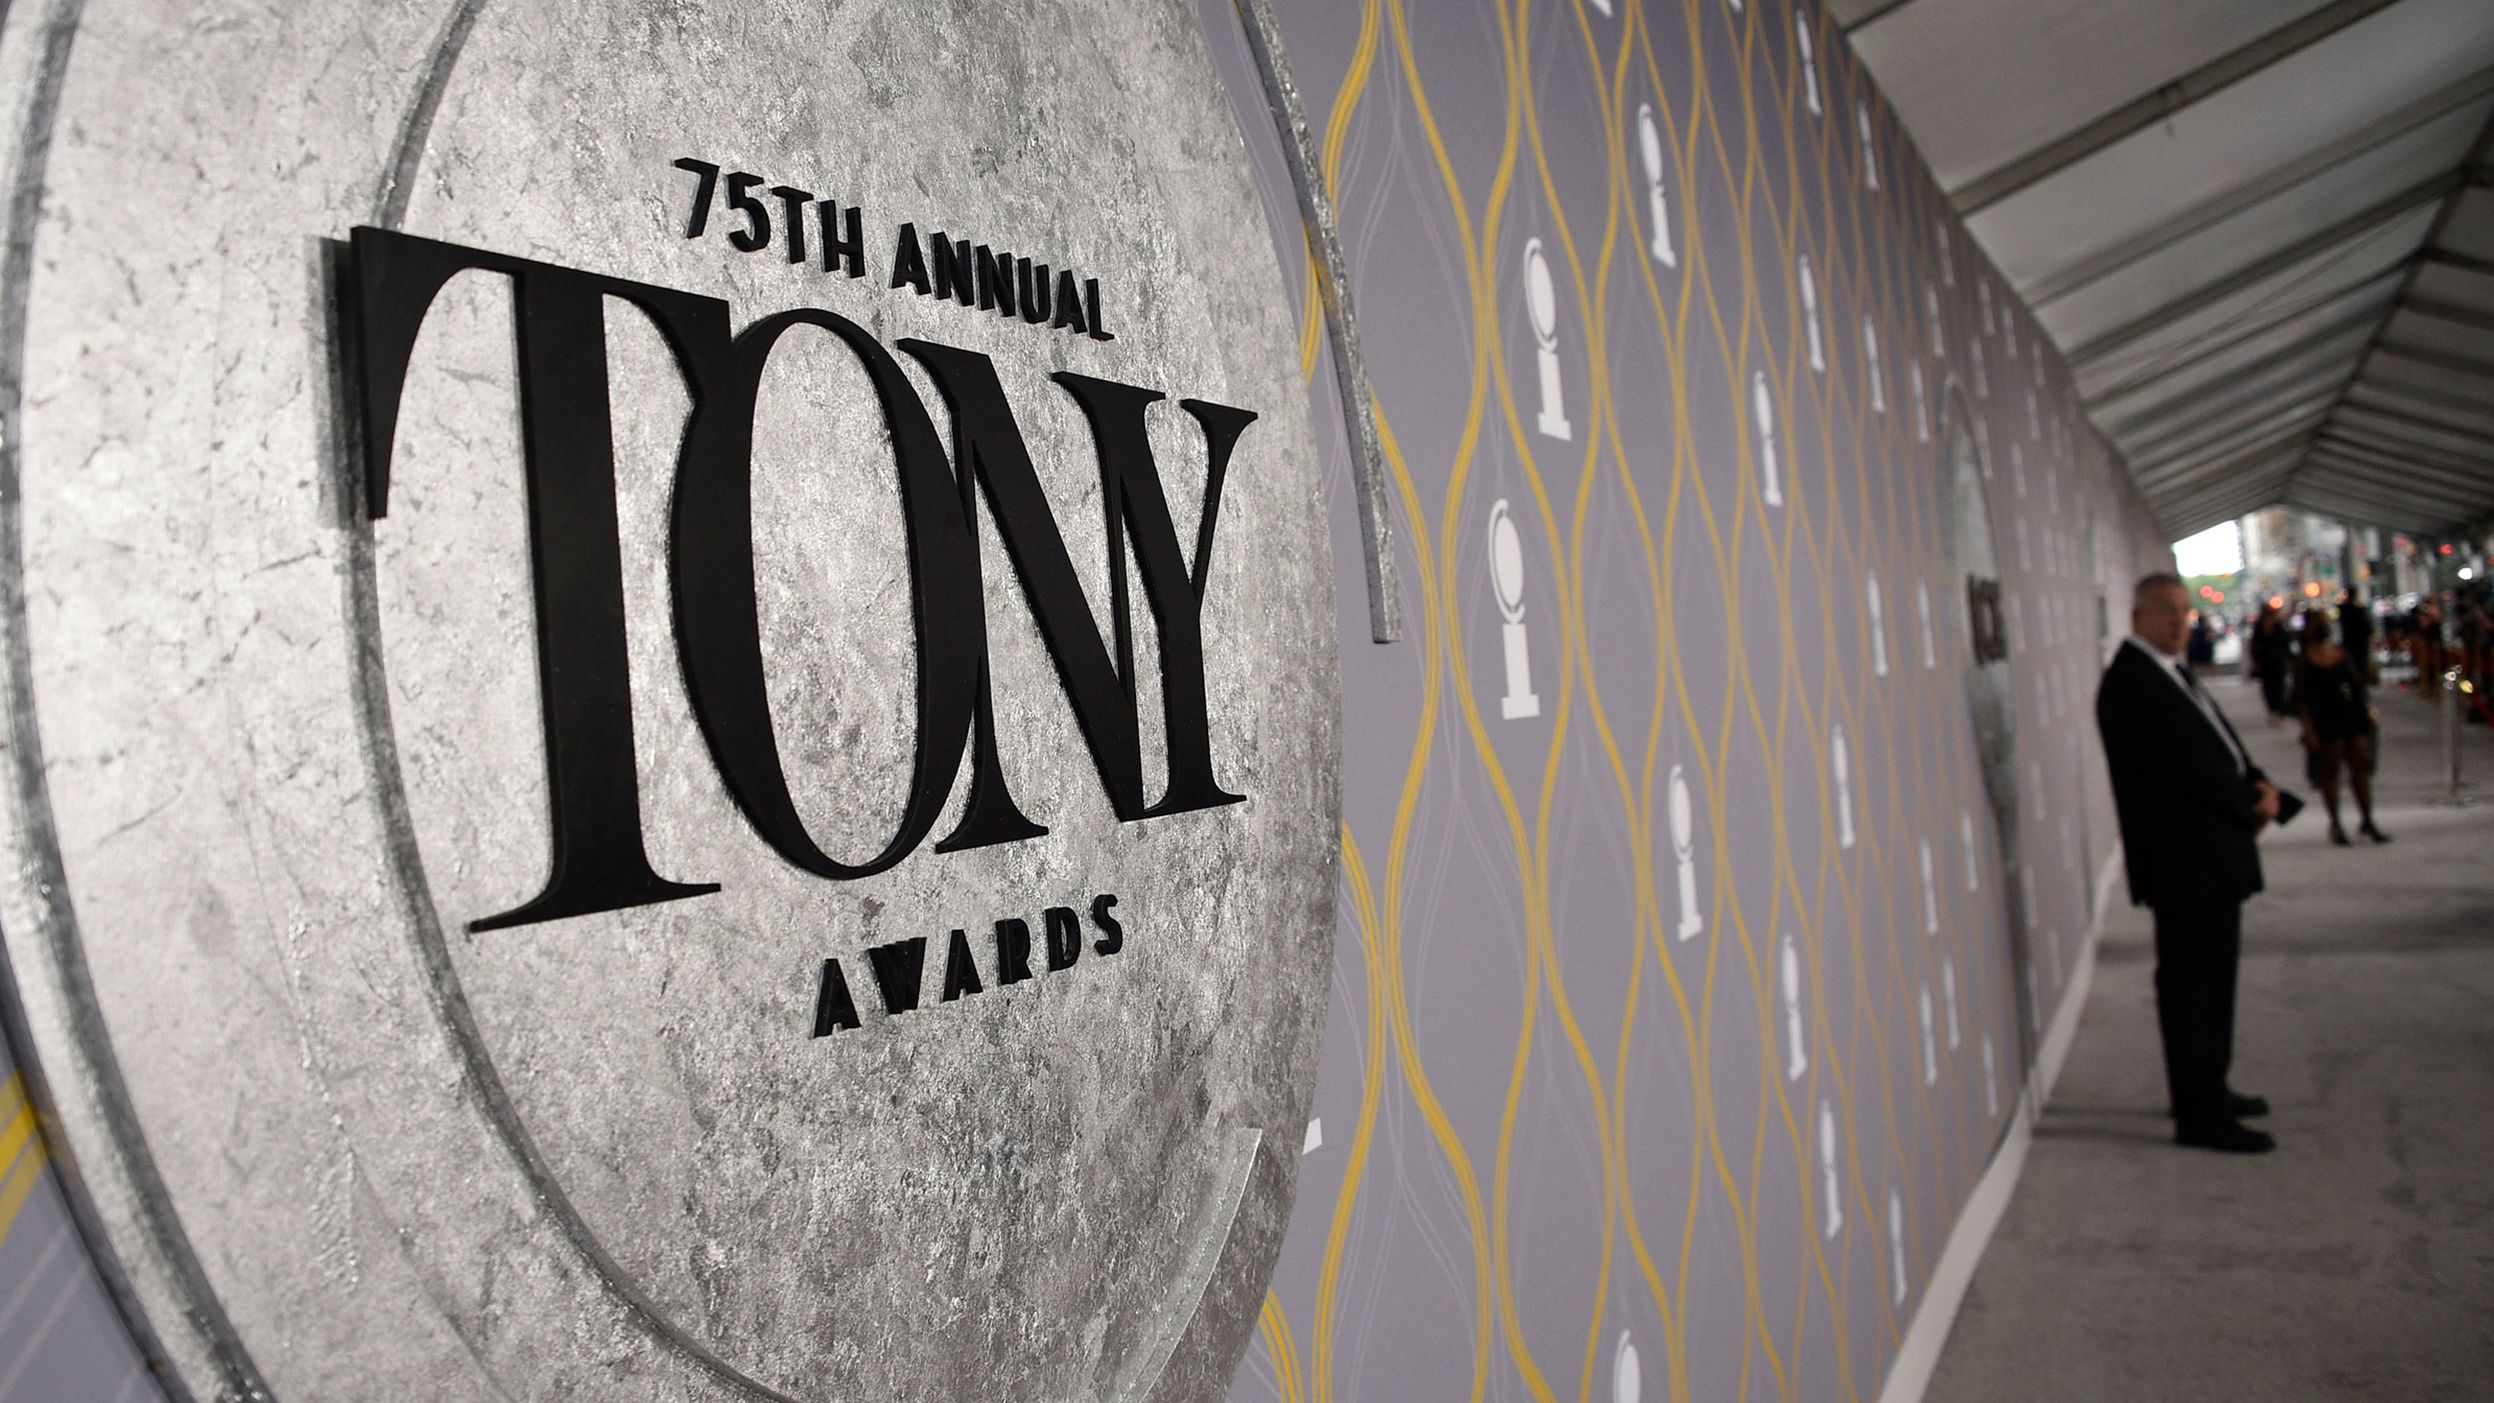 A view of the red carpet for the 75th annual Tony Awards, taking place Sunday, June 12, 2022, at Radio City Music Hall in New York.